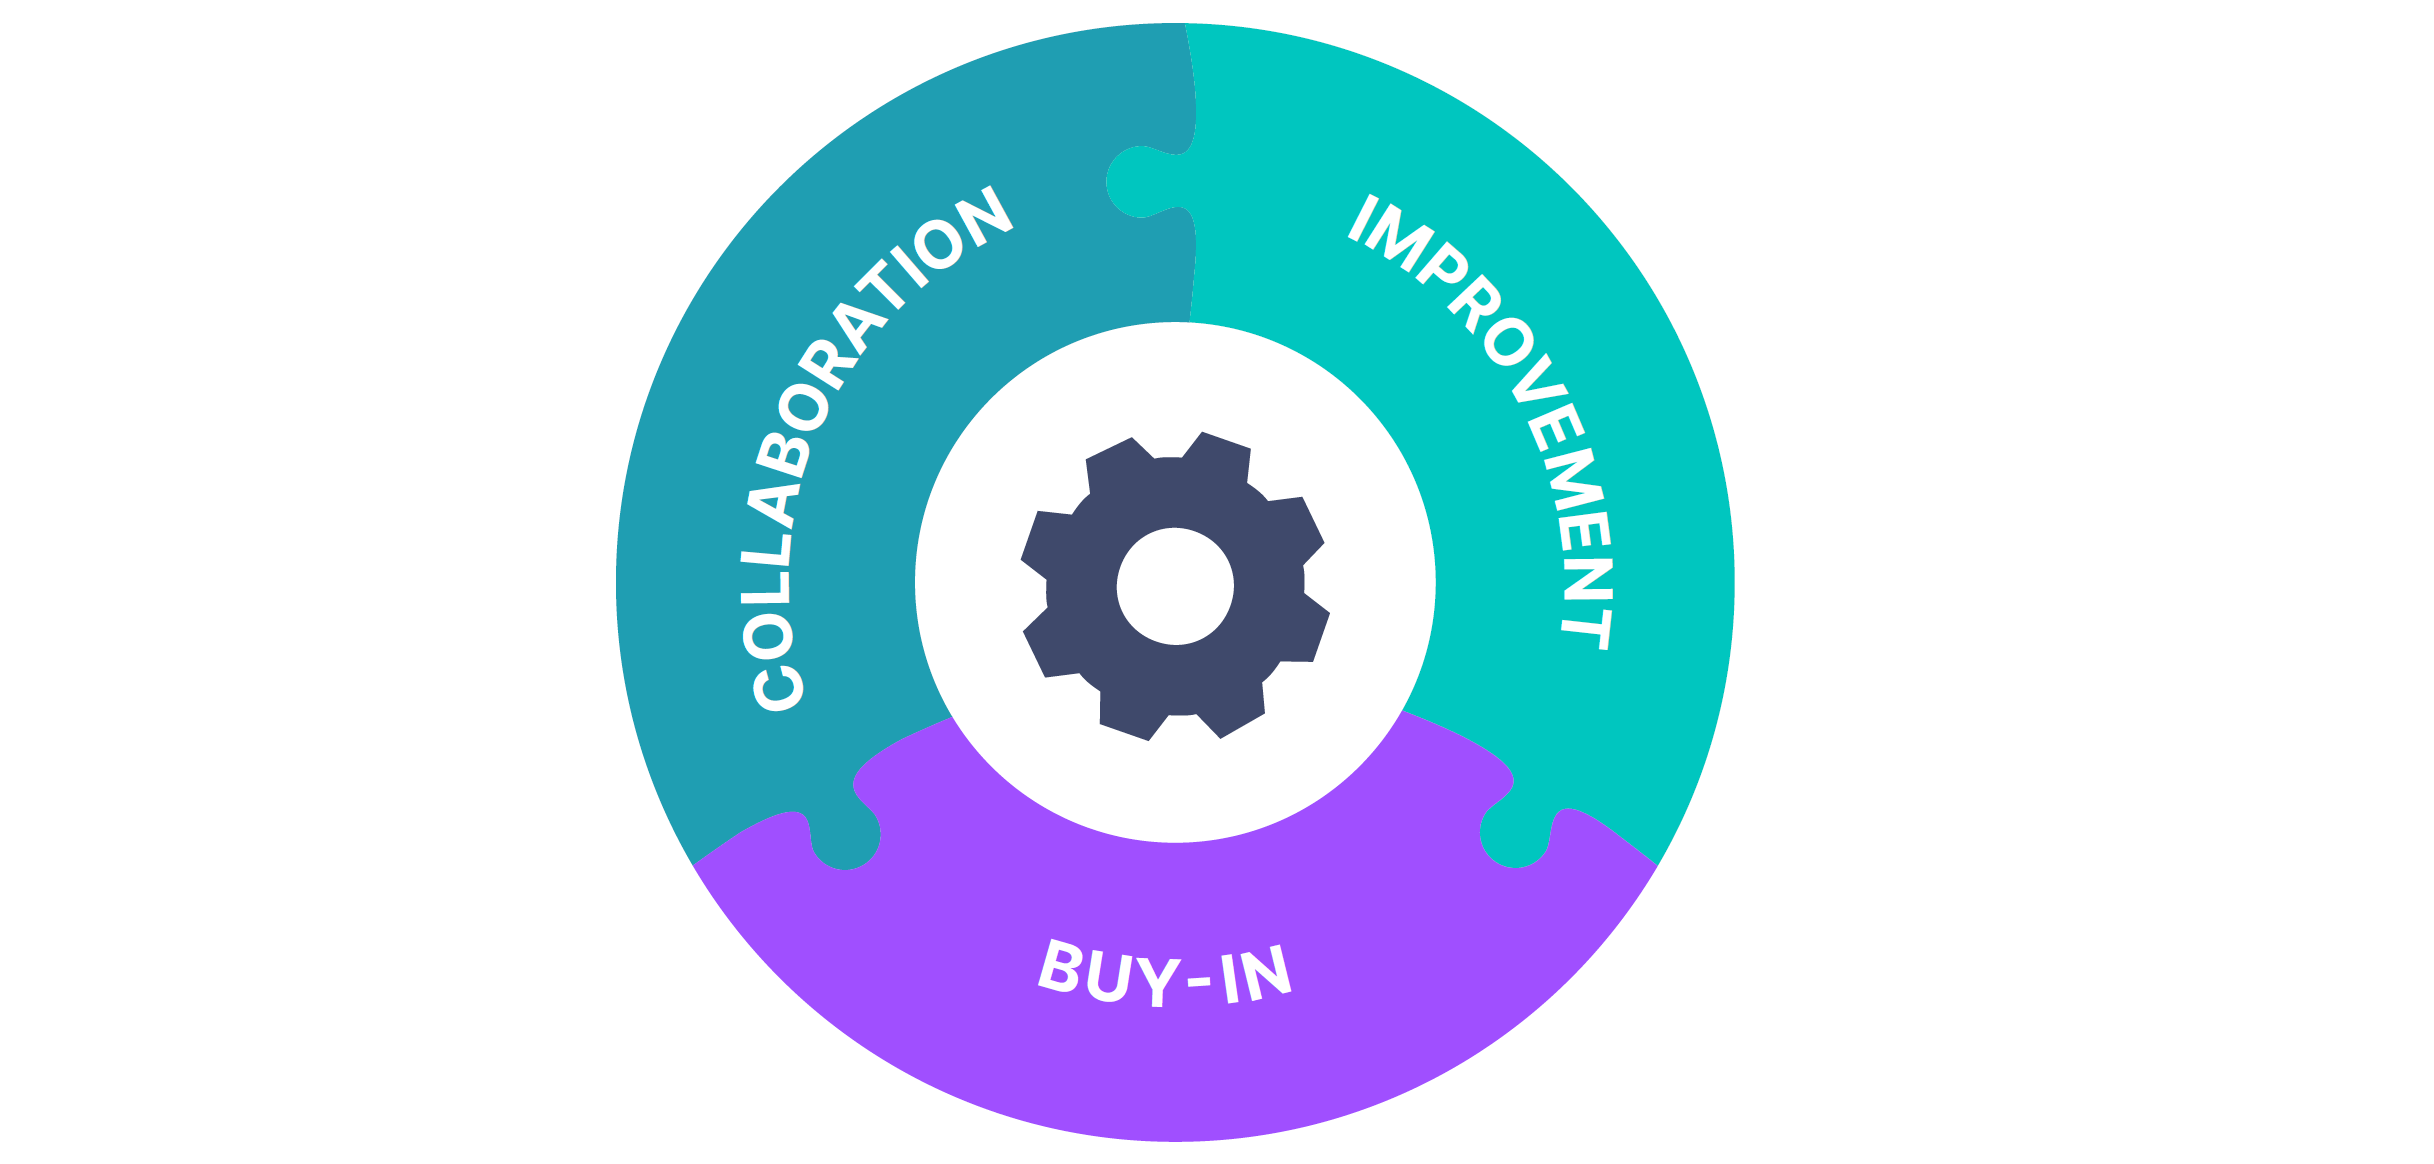 Three traits of DevOps culture: buy-in, collaboration, learning